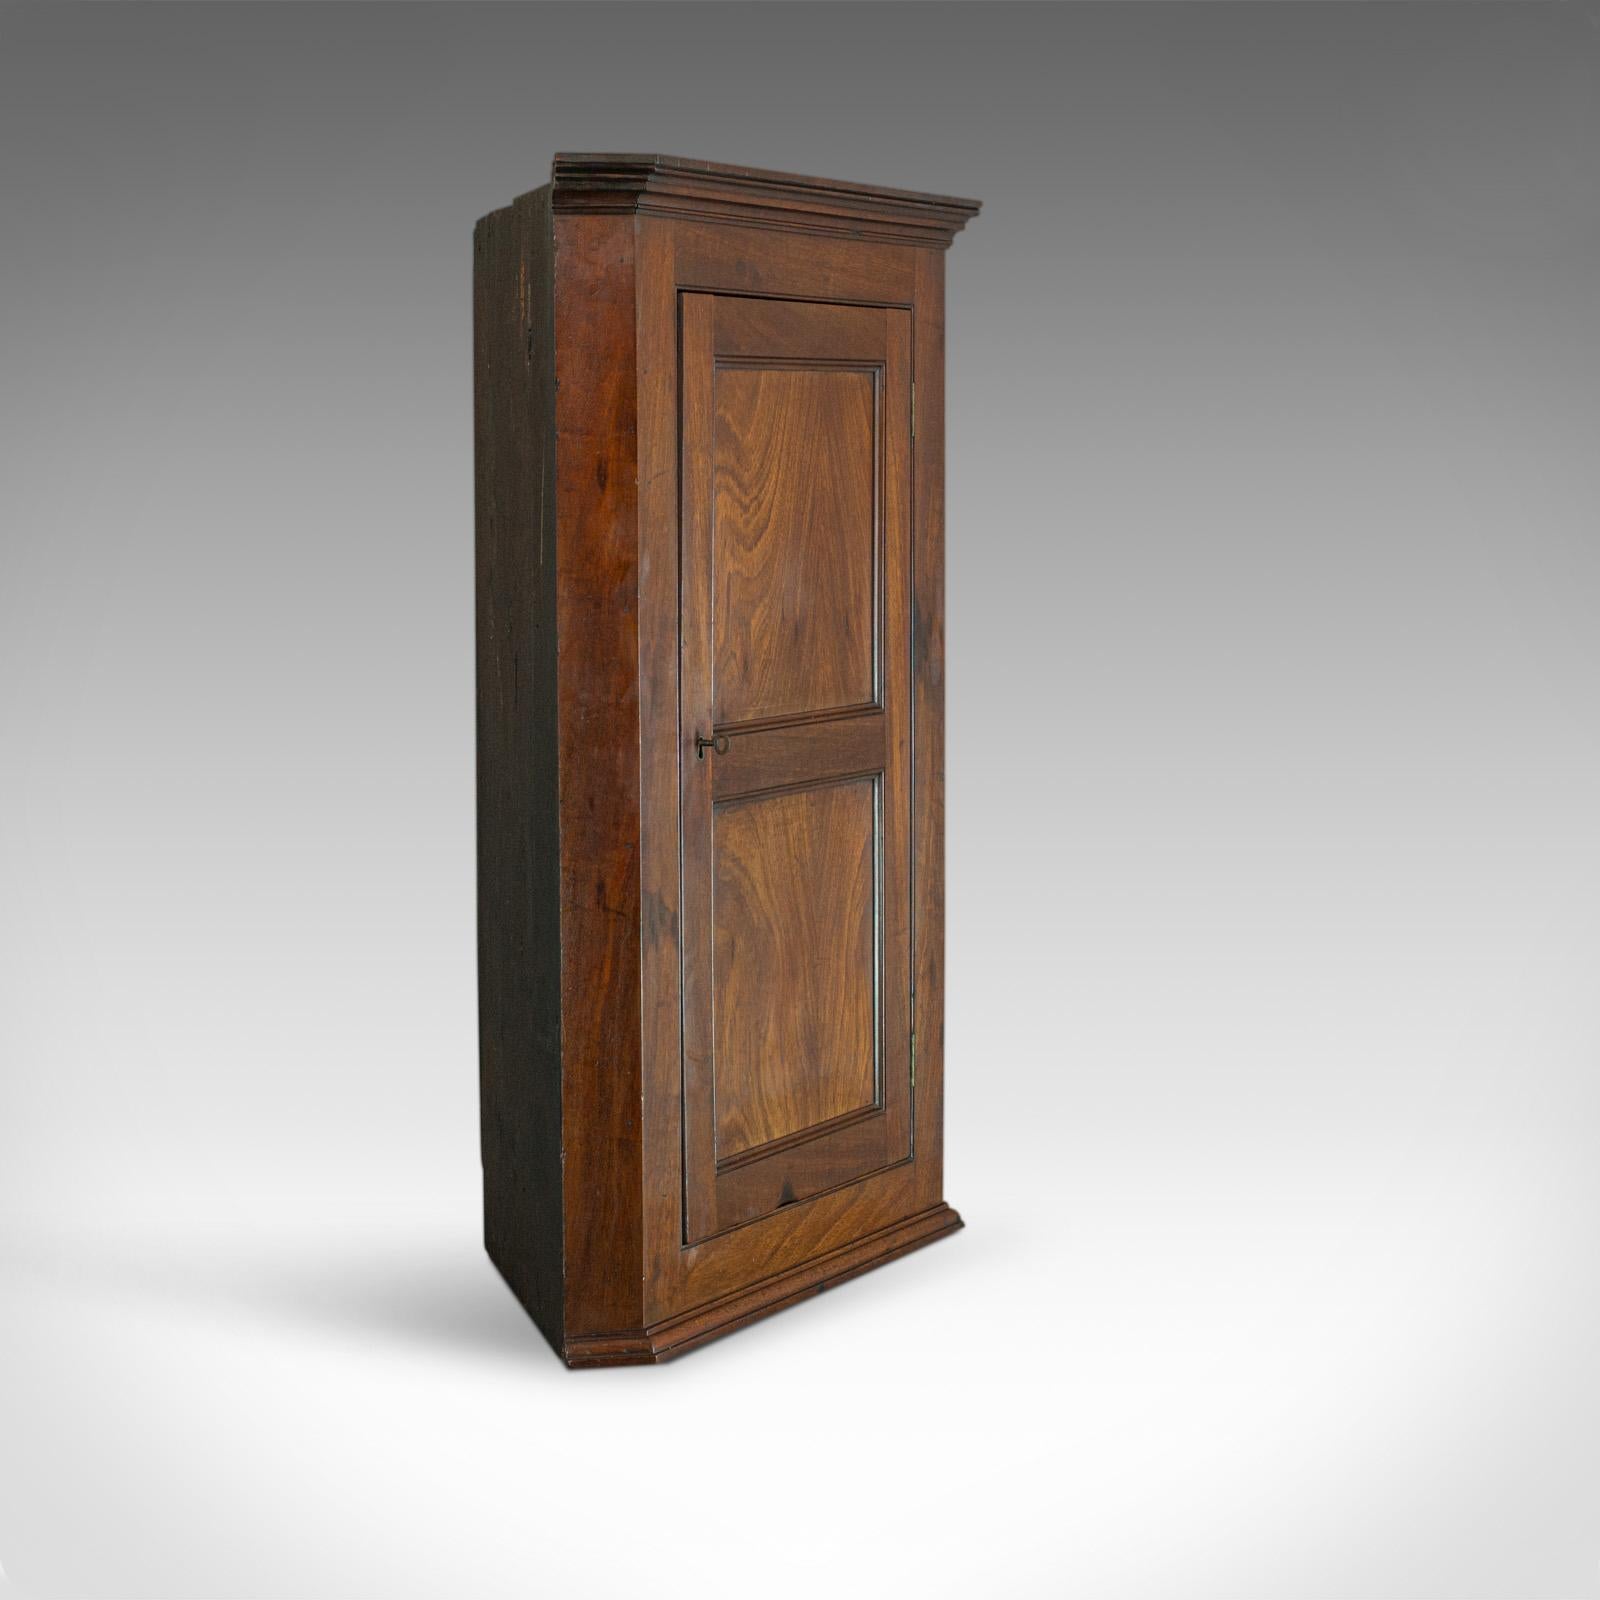 This is an antique corner cabinet. An English, Georgian, mahogany wall cupboard dating to the turn of the 19th century, circa 1800.

Rich mahogany displays good consistent colour and a desirable aged patina
Fine grain interest throughout with a